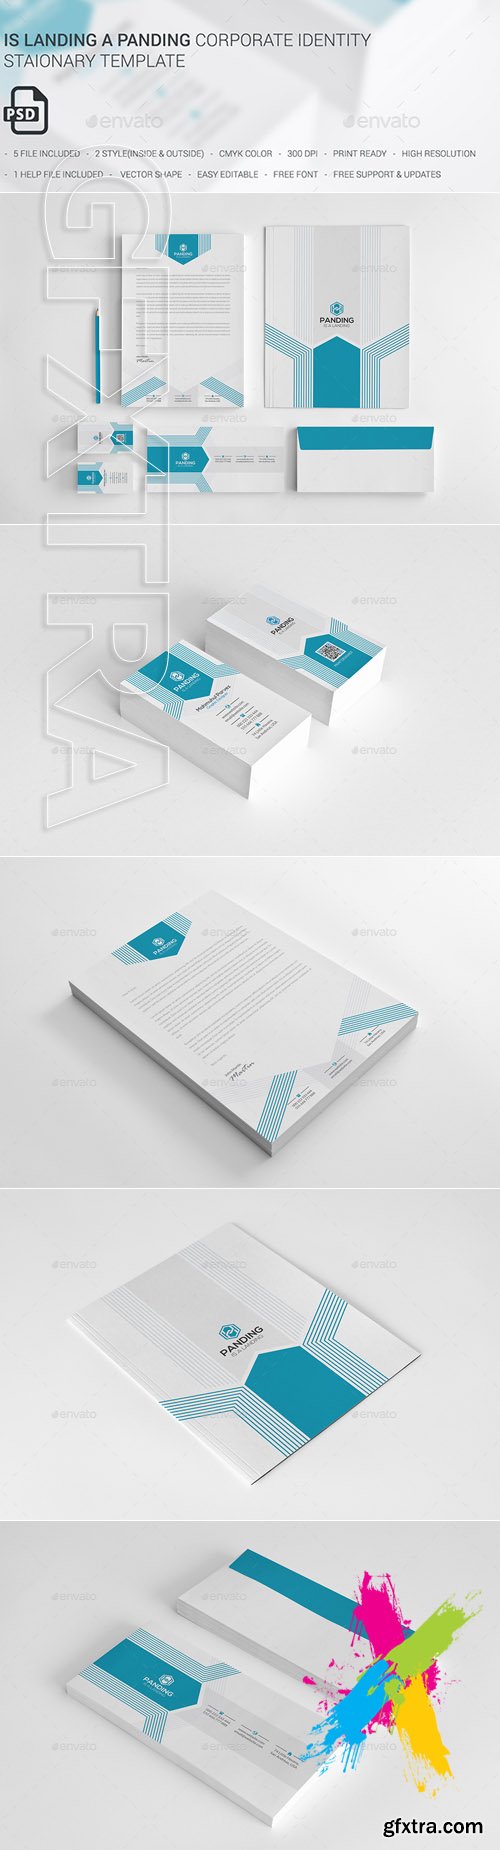 Graphicriver - Is Landing A Panding 20191945